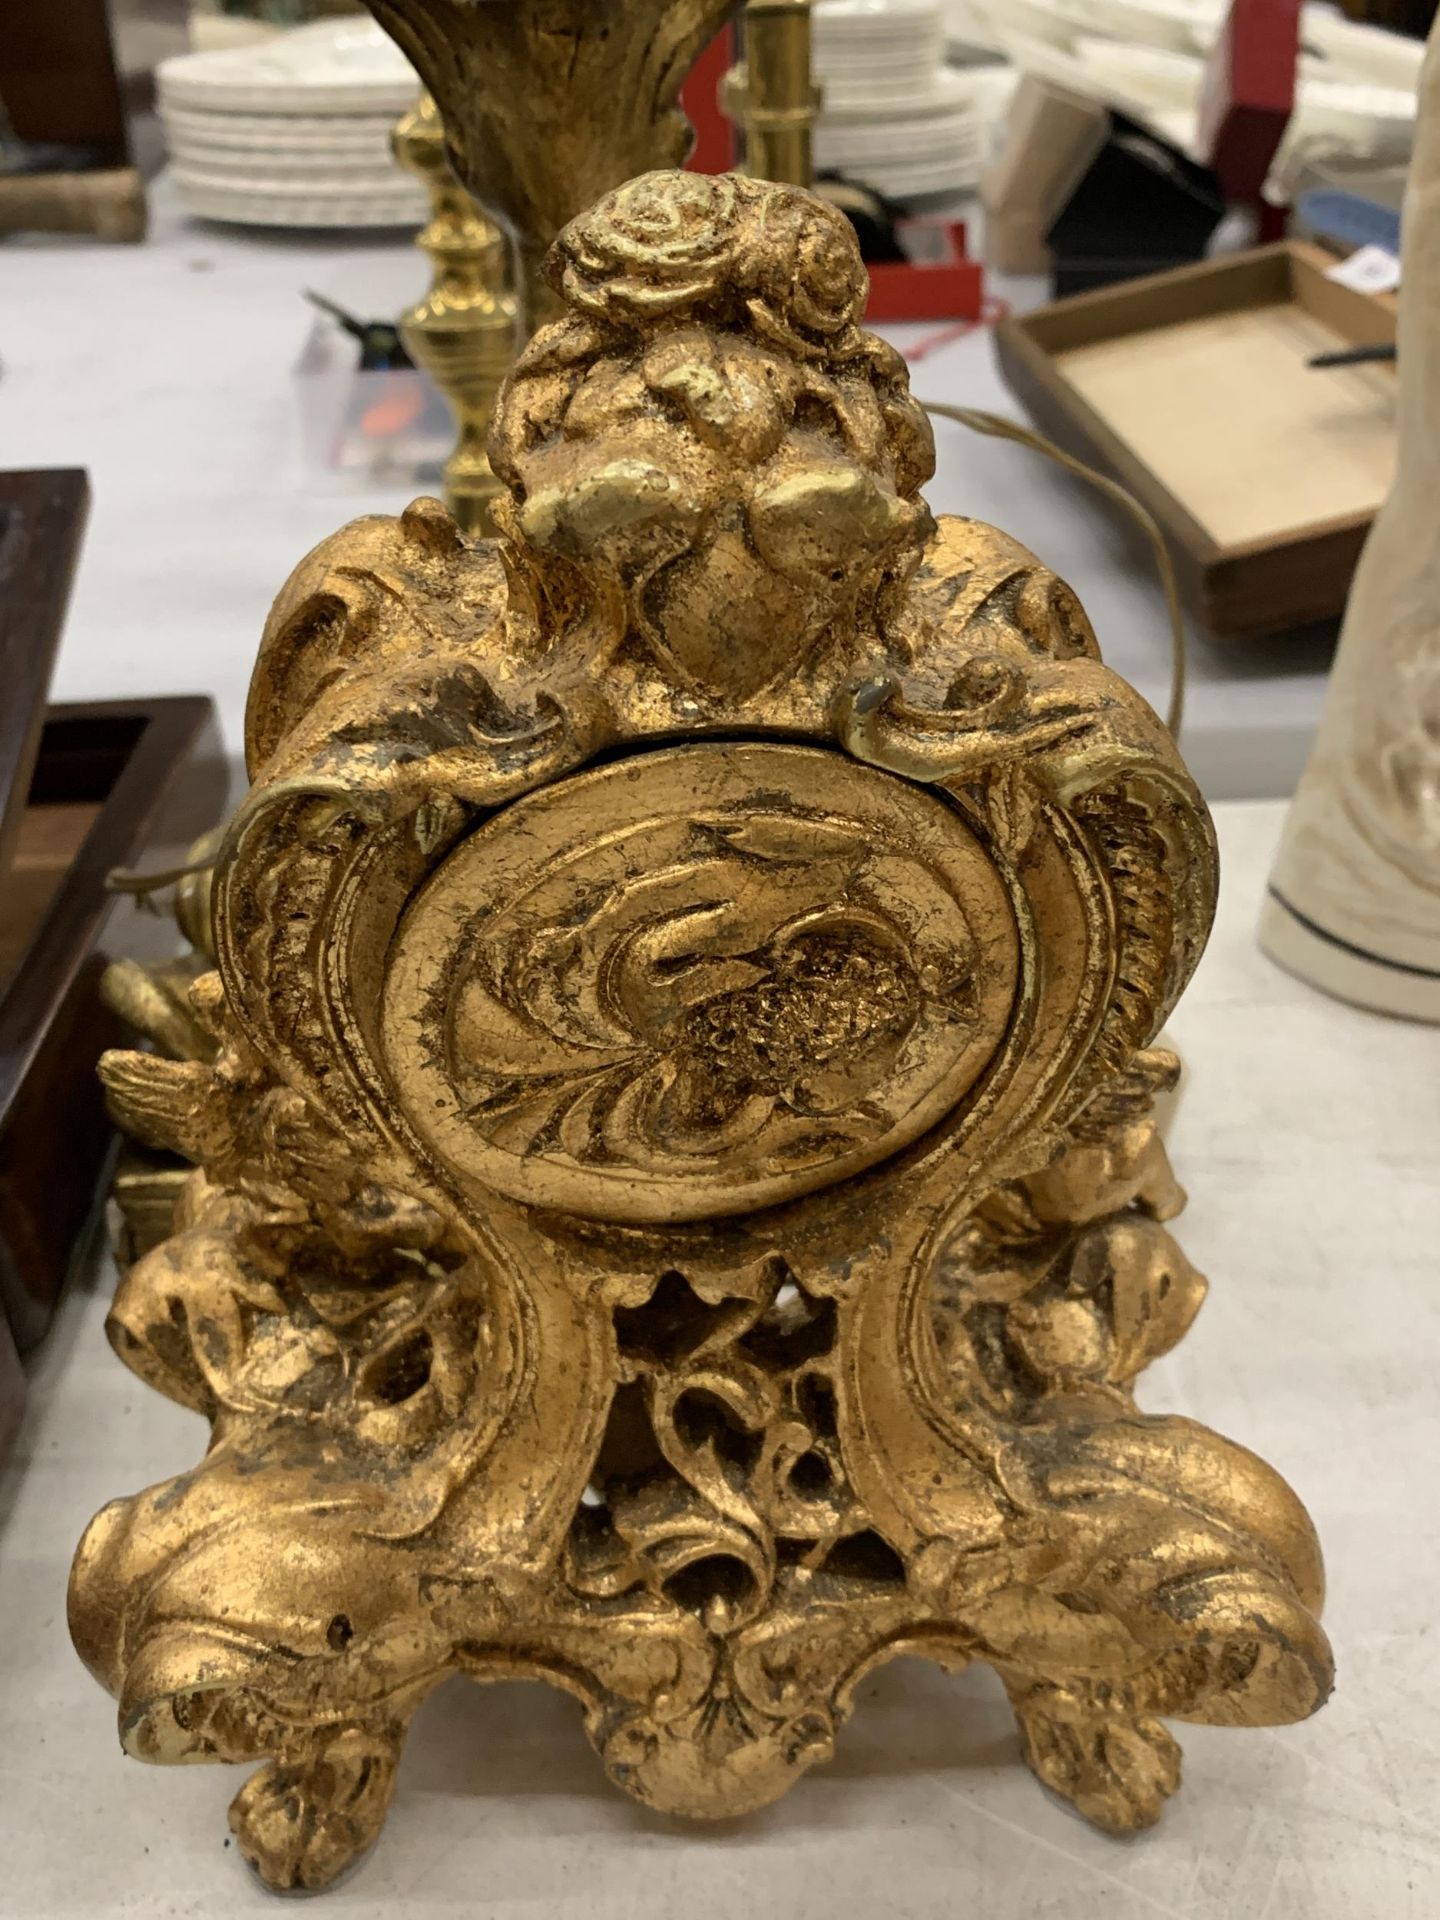 A VIANTAGE STYLE CLOCK WITH CLASSICAL GILT DECORATION PLUS A GILT TABLE LAMP IN THE FORM OF A FISH - Bild 3 aus 3